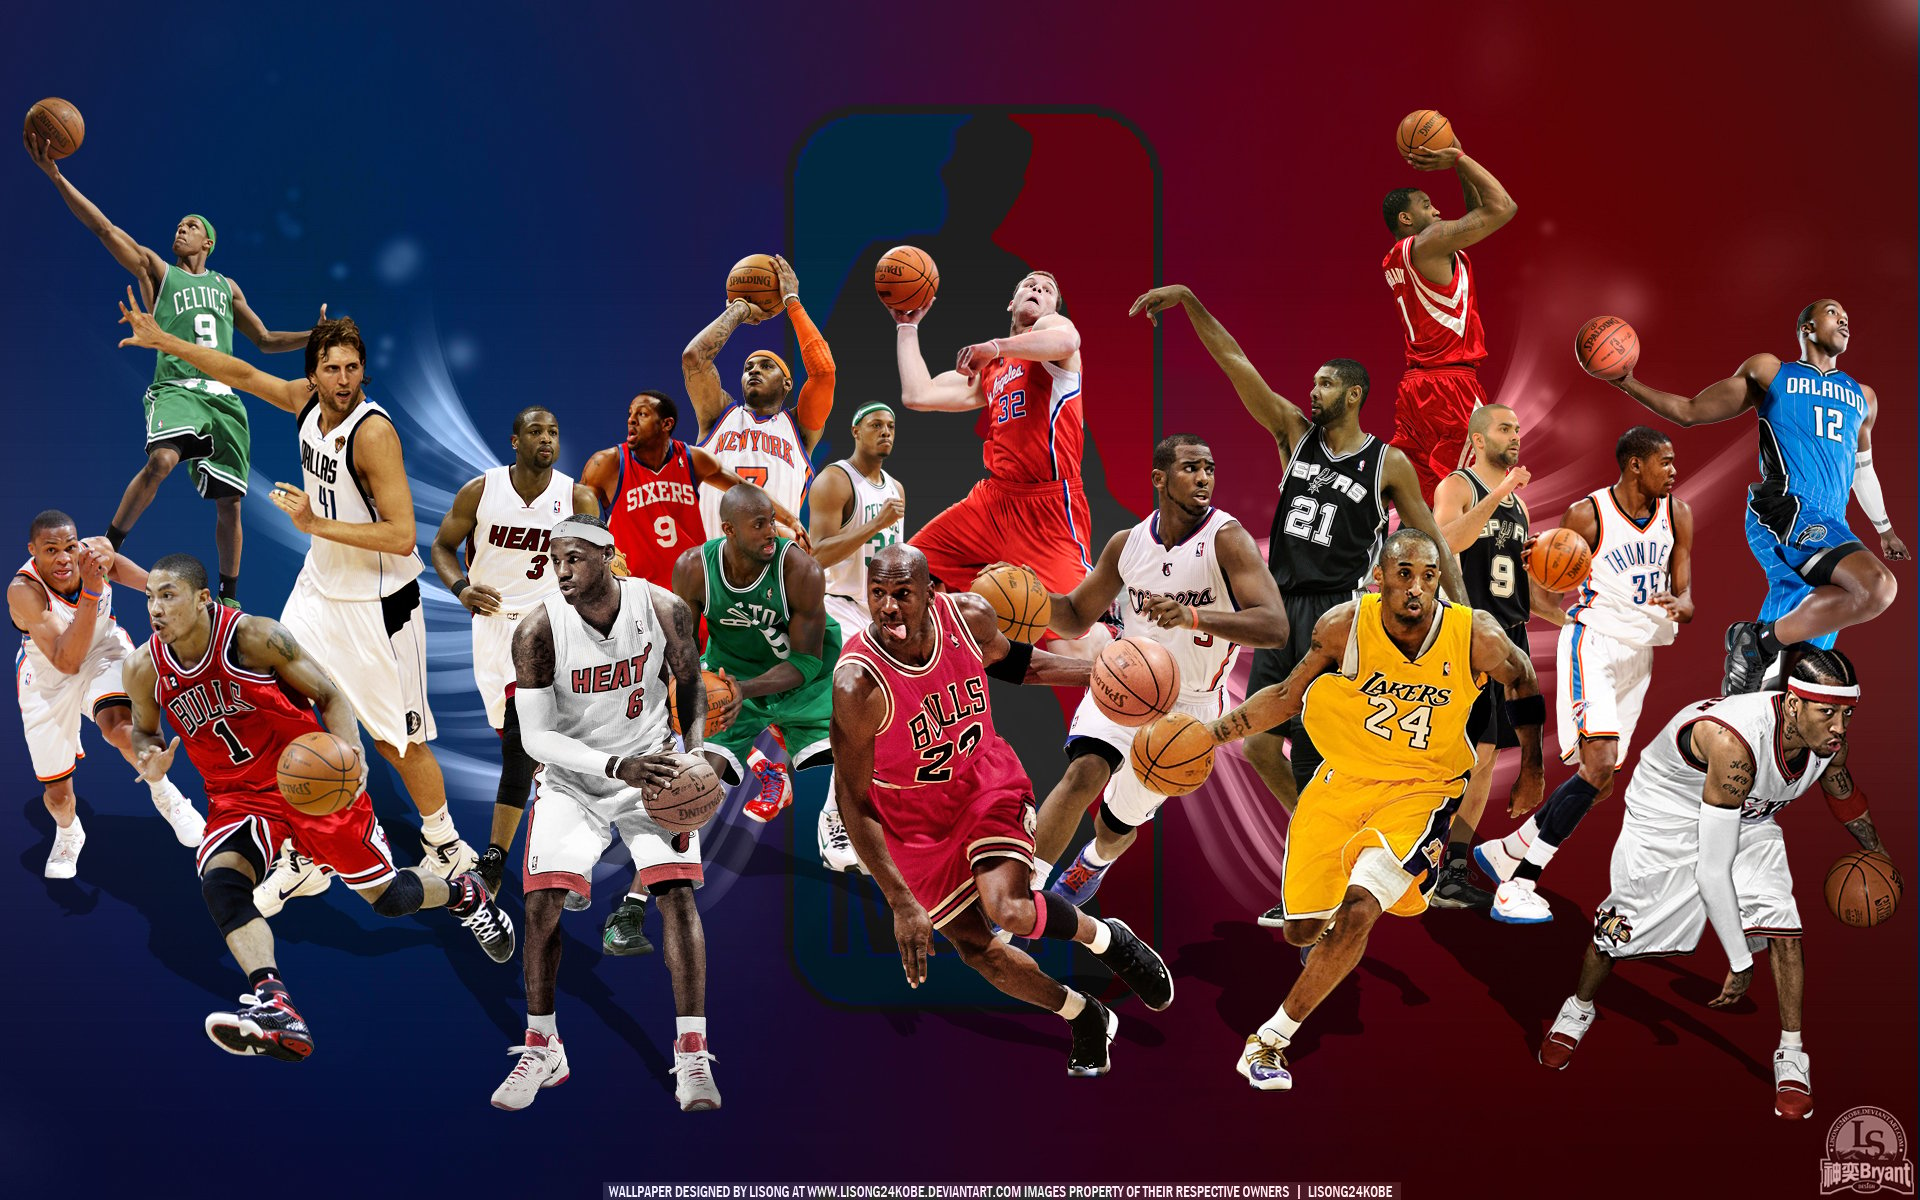 basketball wallpapers basketball wallpapers 2015 basketball wallpapers 1920x1200